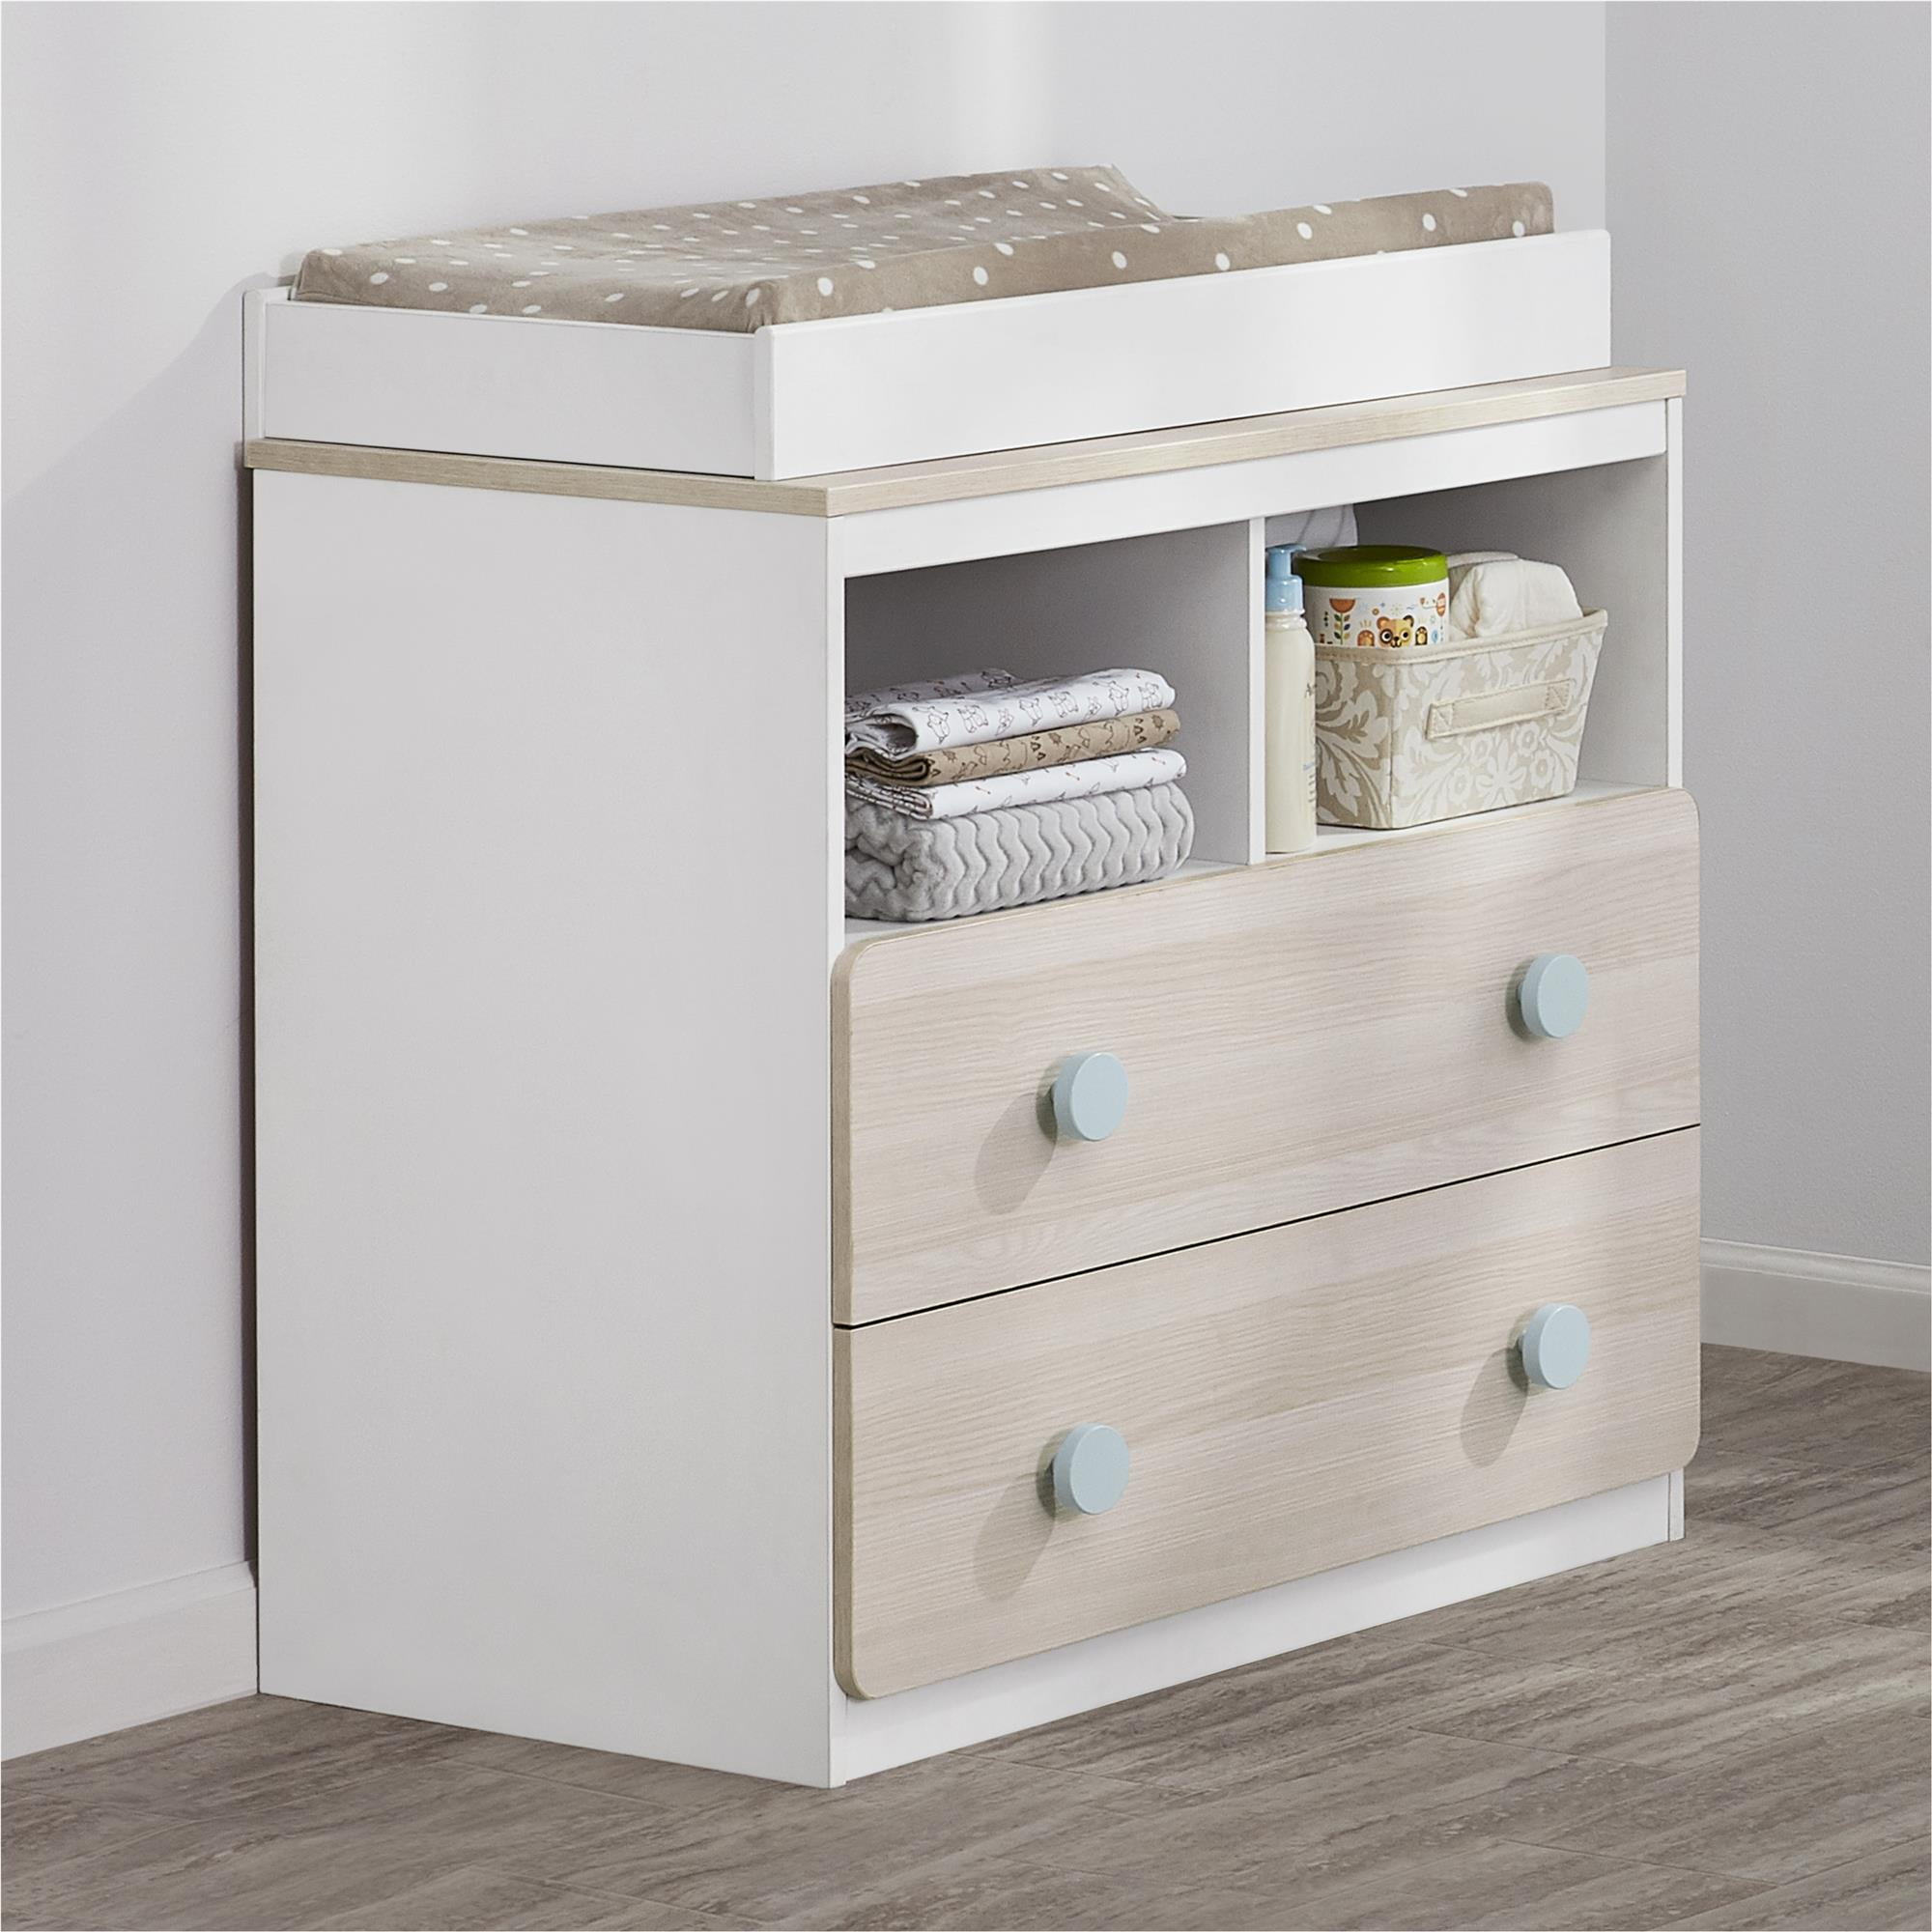 walmart baby dresser and changing table